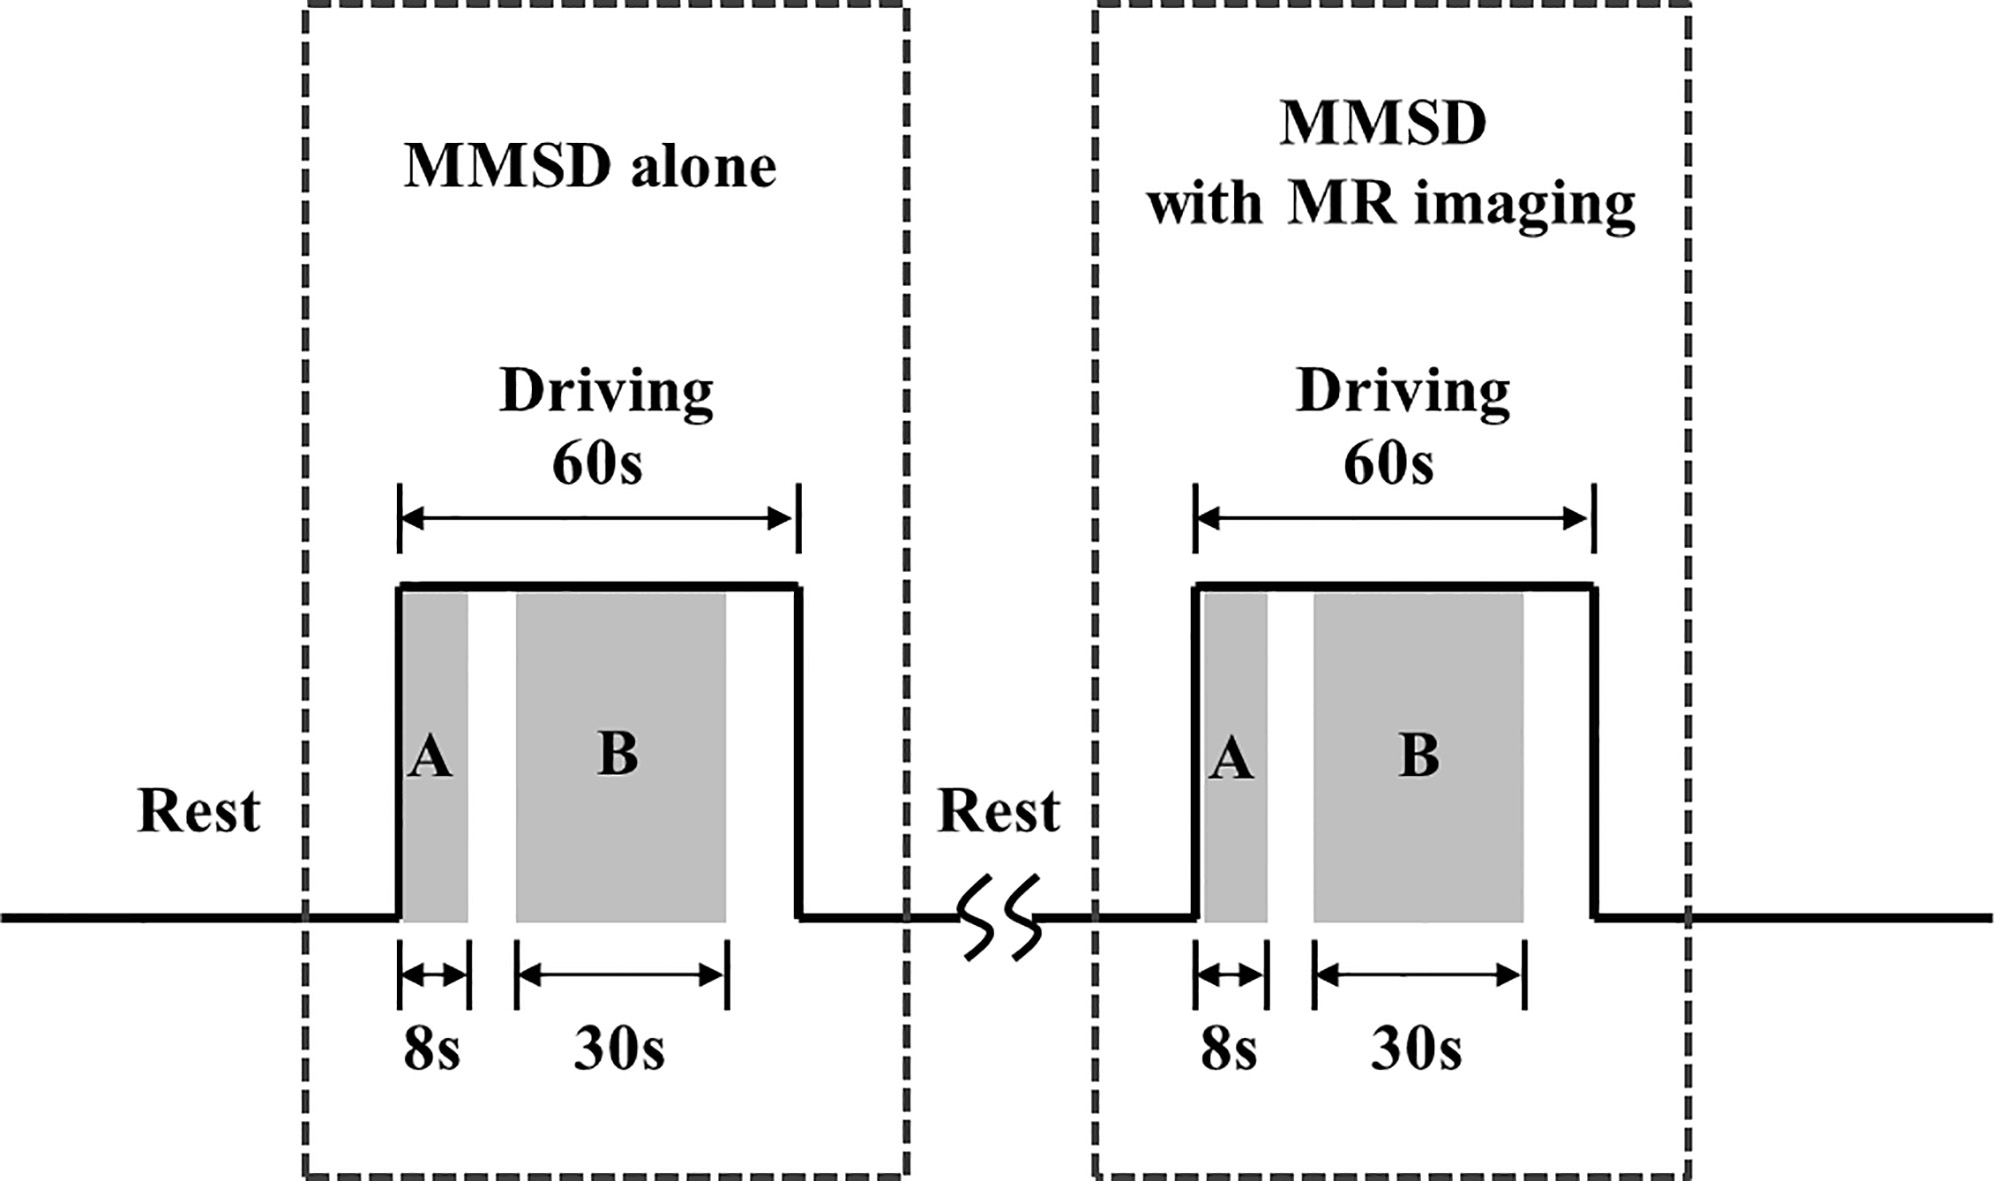 Experimental protocol to evaluate the effects of the magnetic resonance system on the physiological and kinematic signals recorded from the multi-biosignal measurement system for driving. (a) Kinematic analysis interval, and (b) physiological analysis interval.